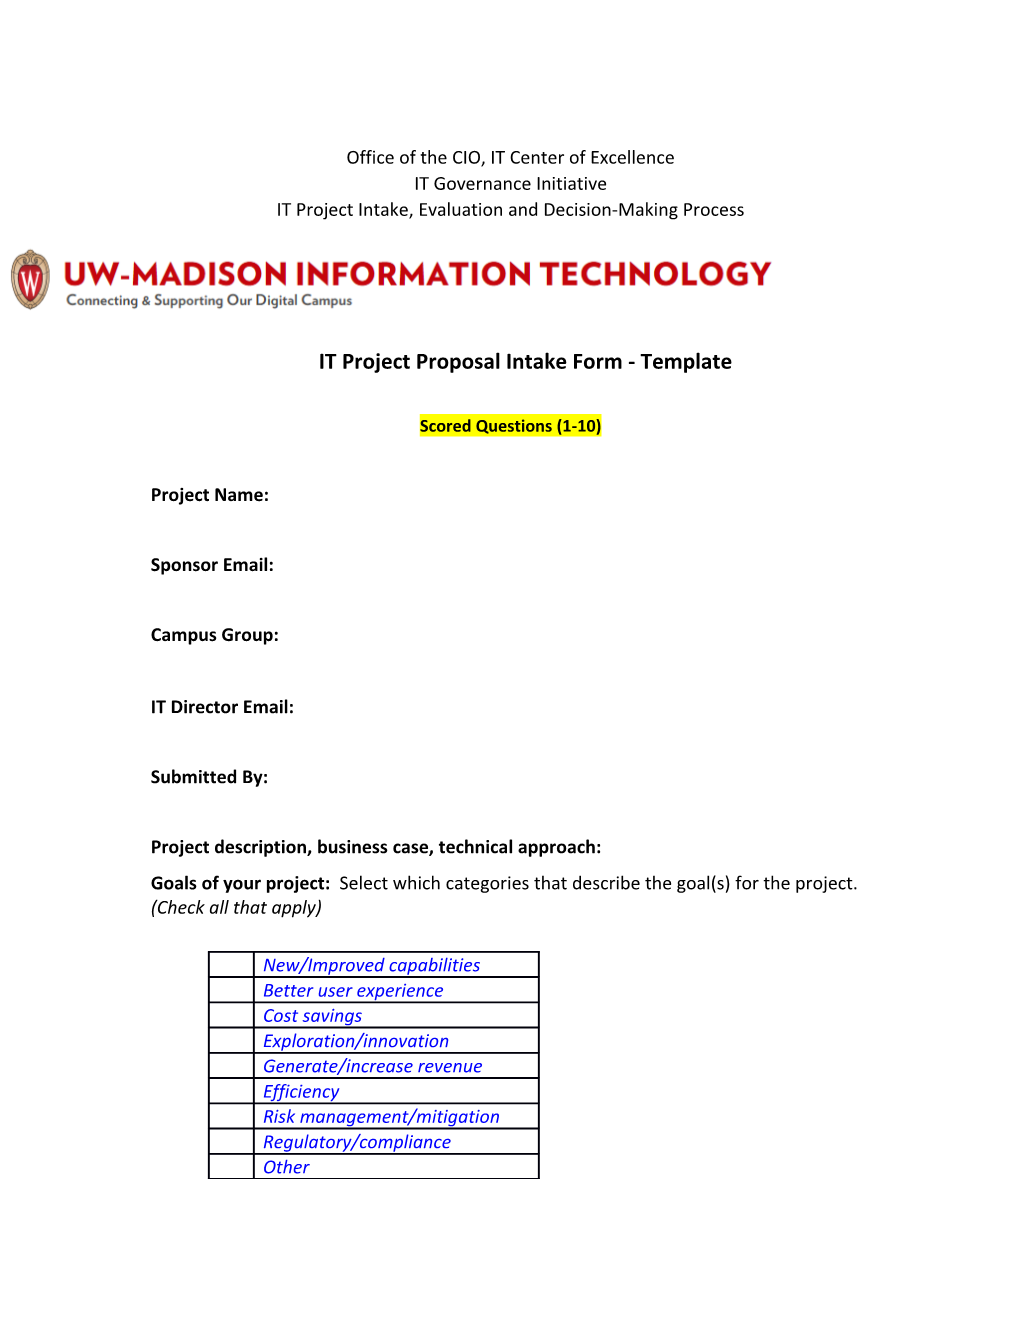 IT Project Proposal Intake Form - Template